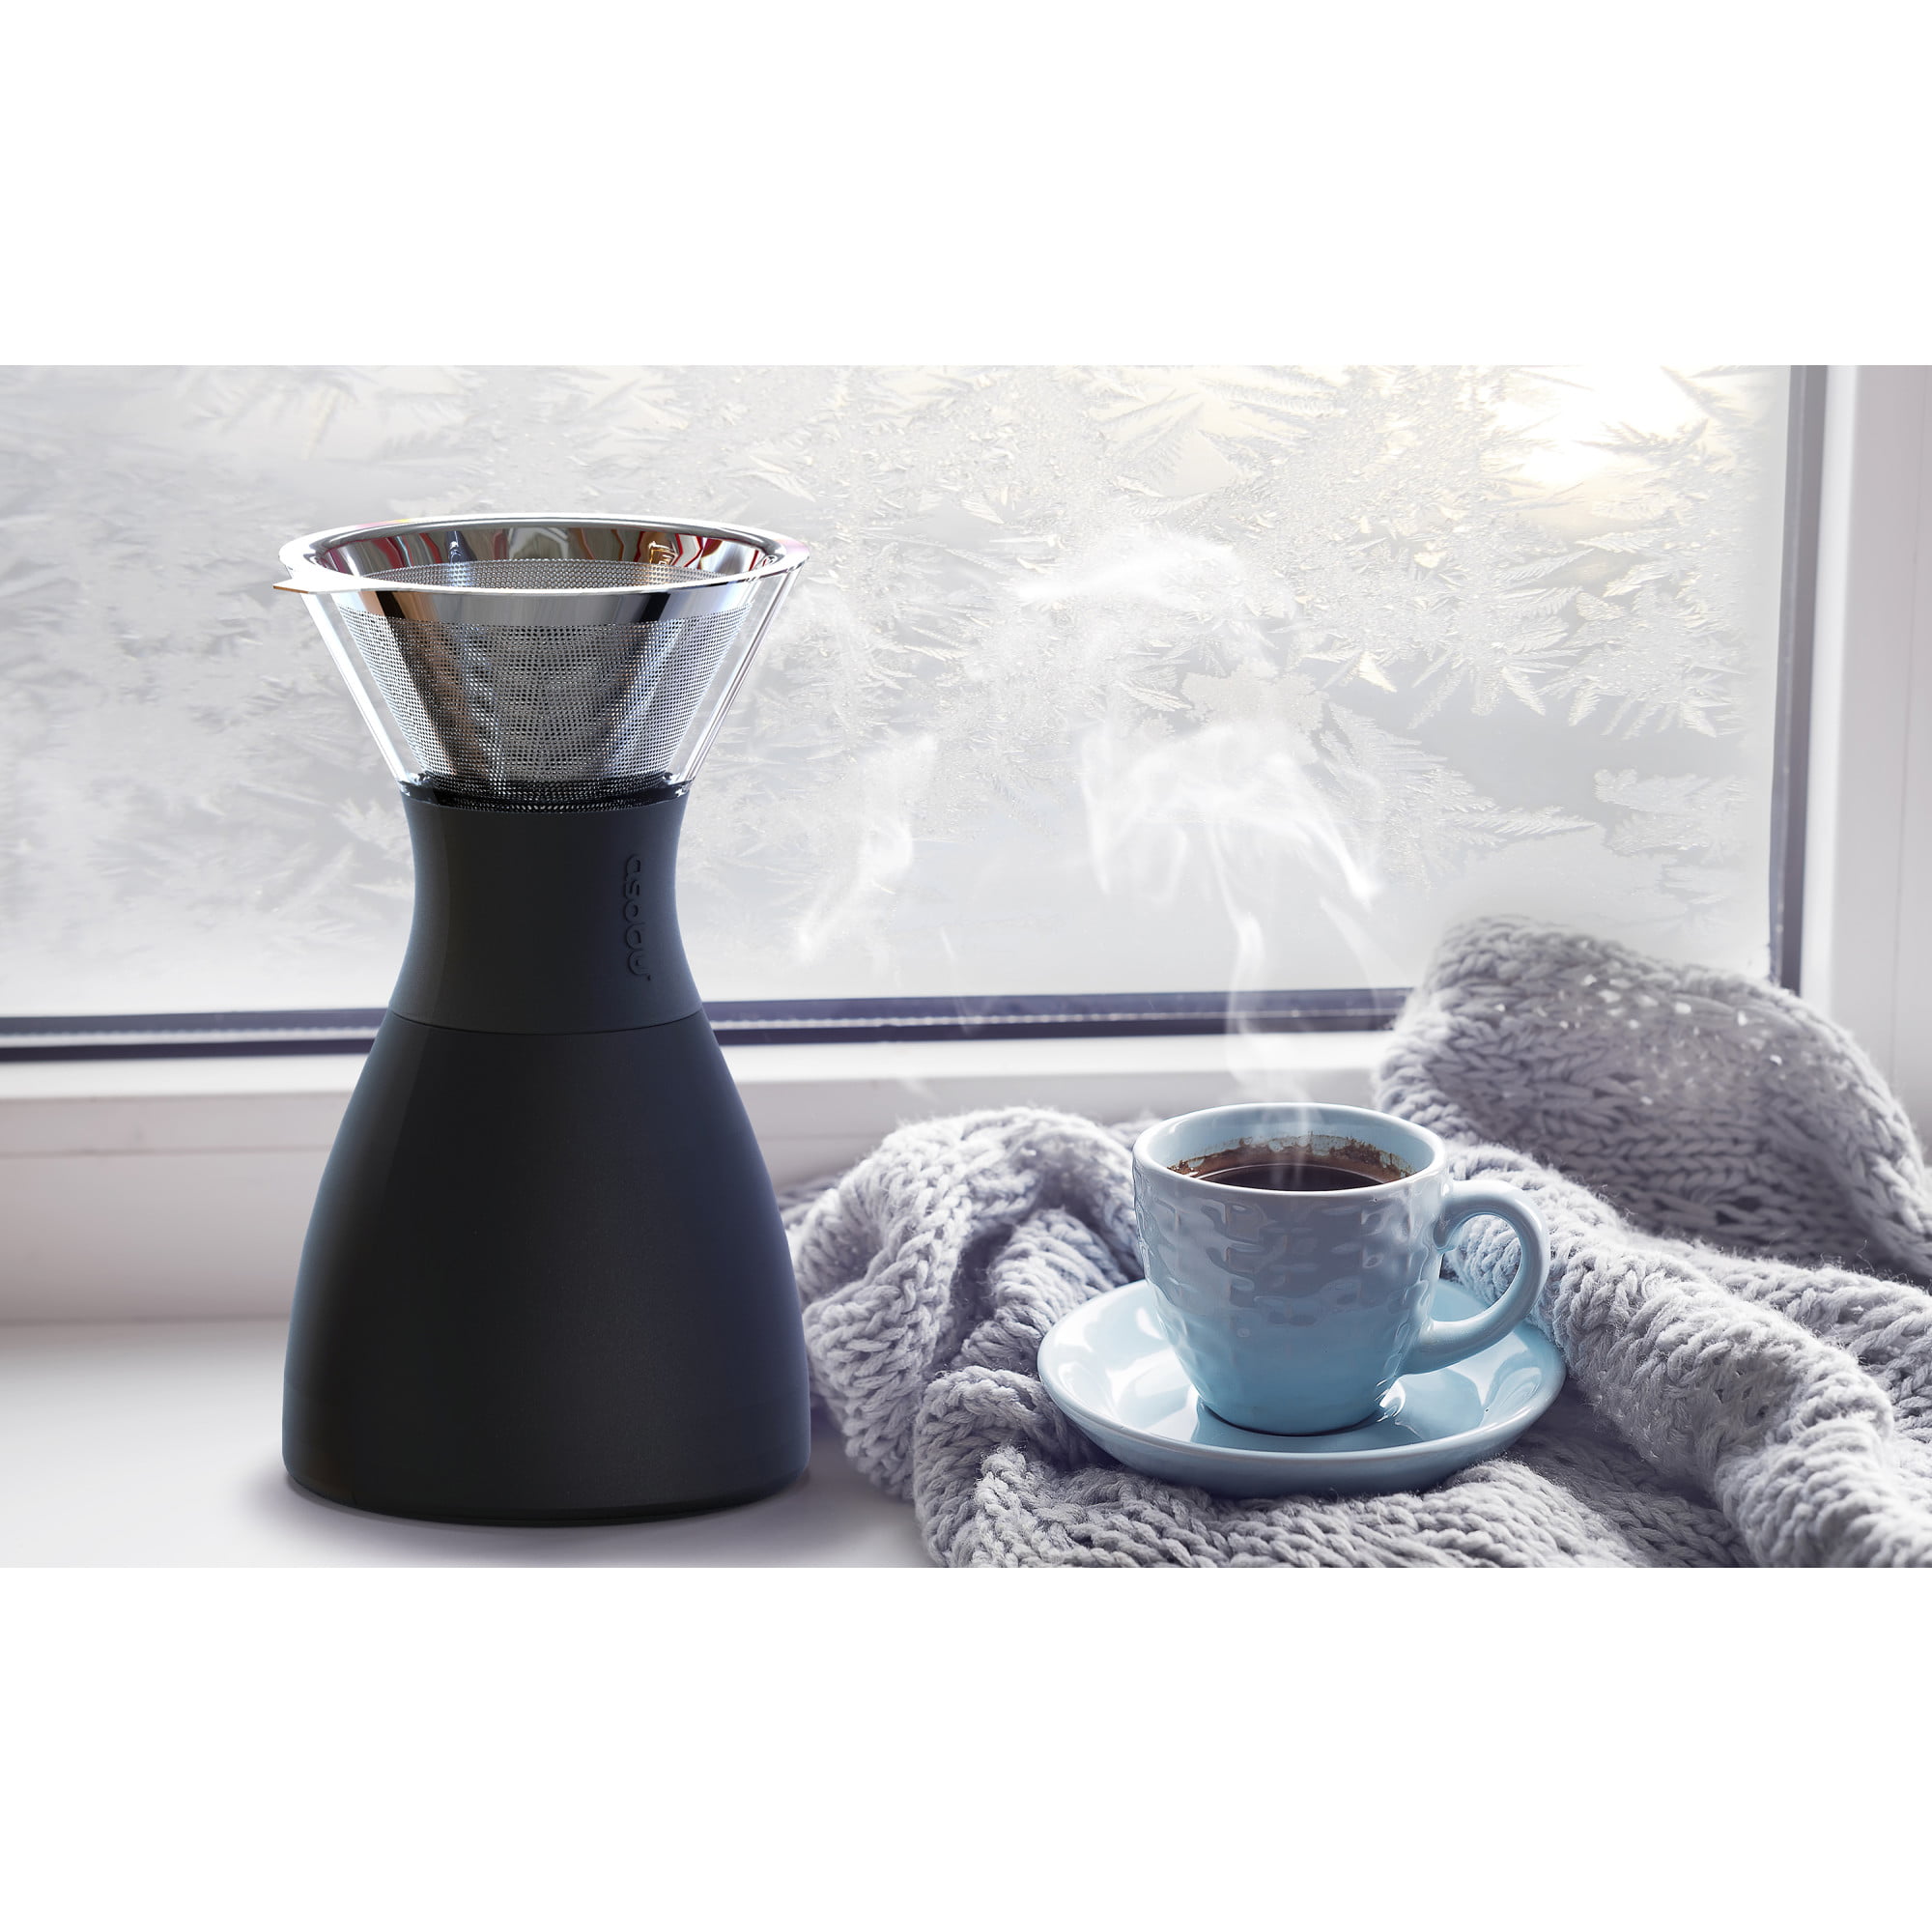 Asobu Pour Over Coffee Maker with Portal Insulated Carafe - Macy's